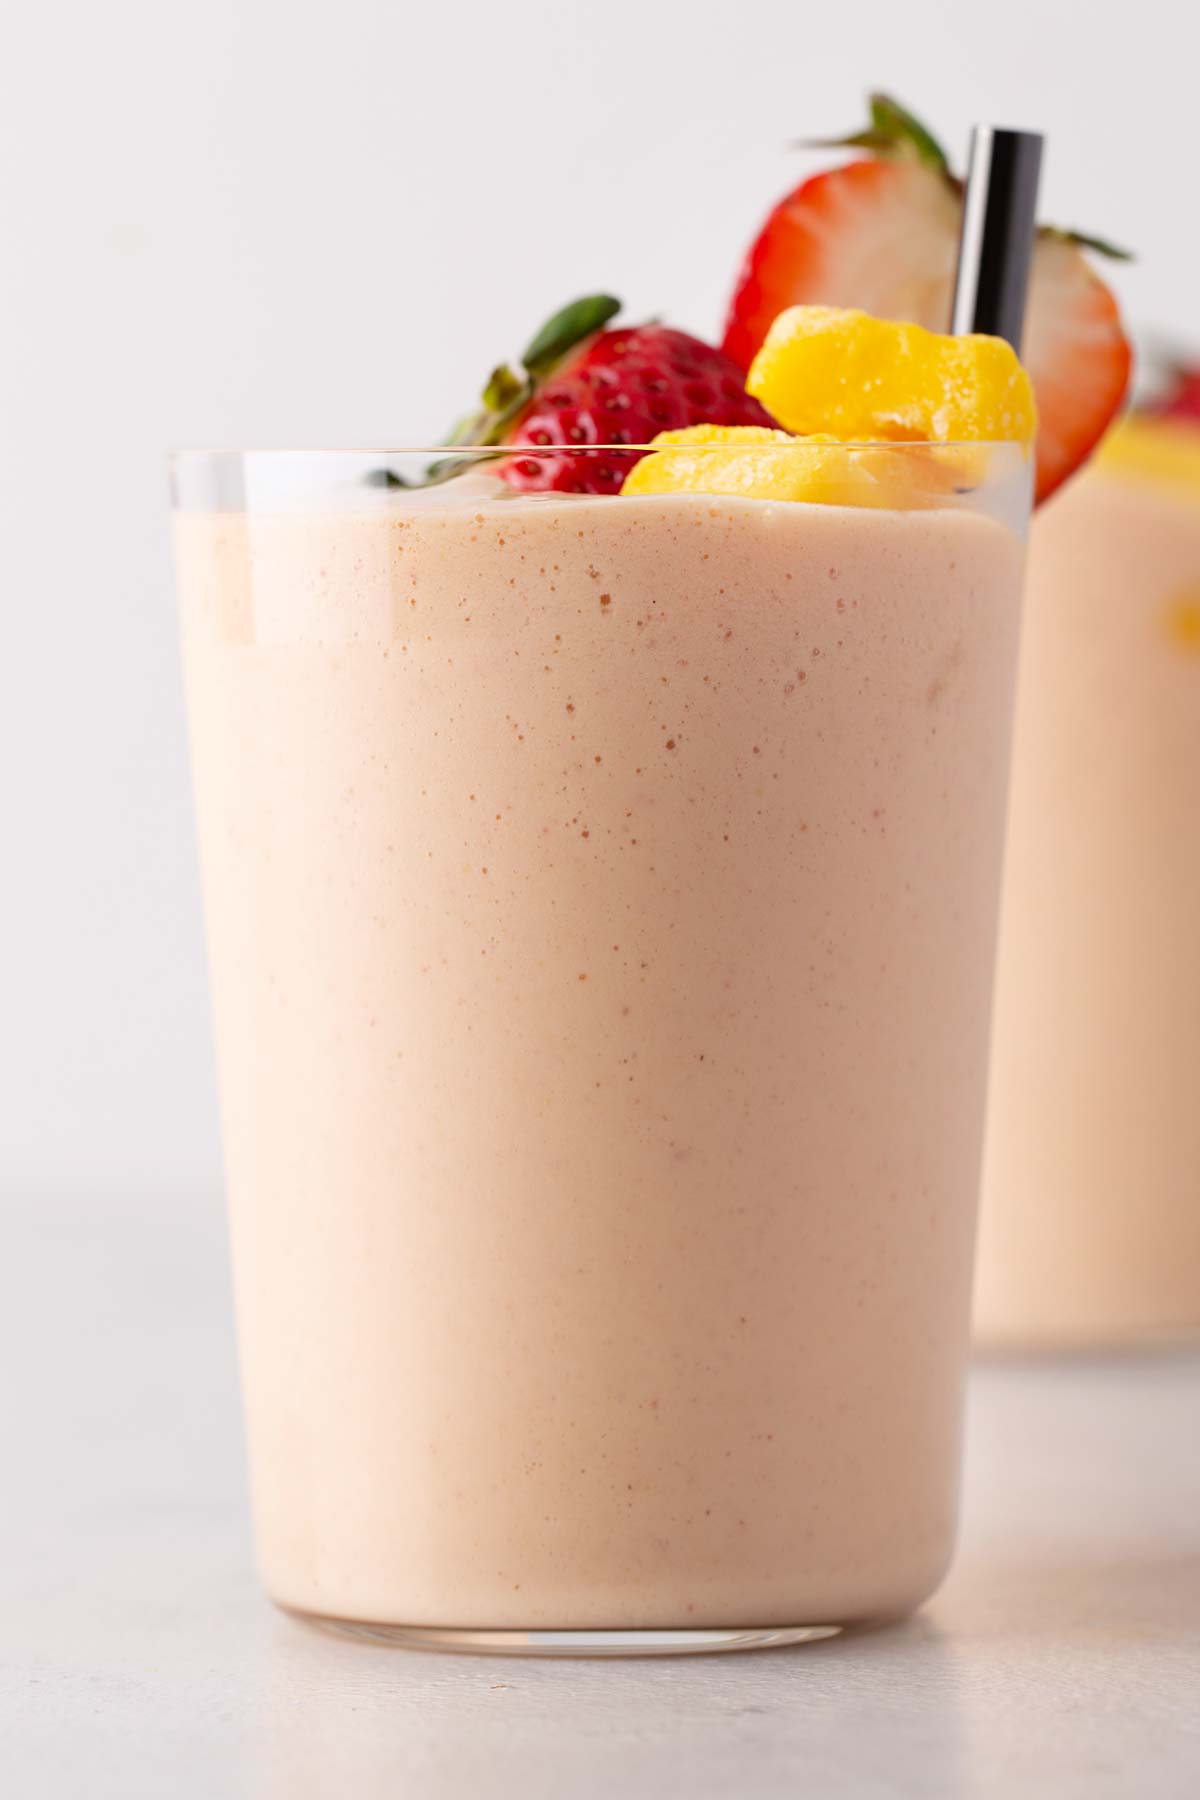 Strawberry mango smoothie in a glass.